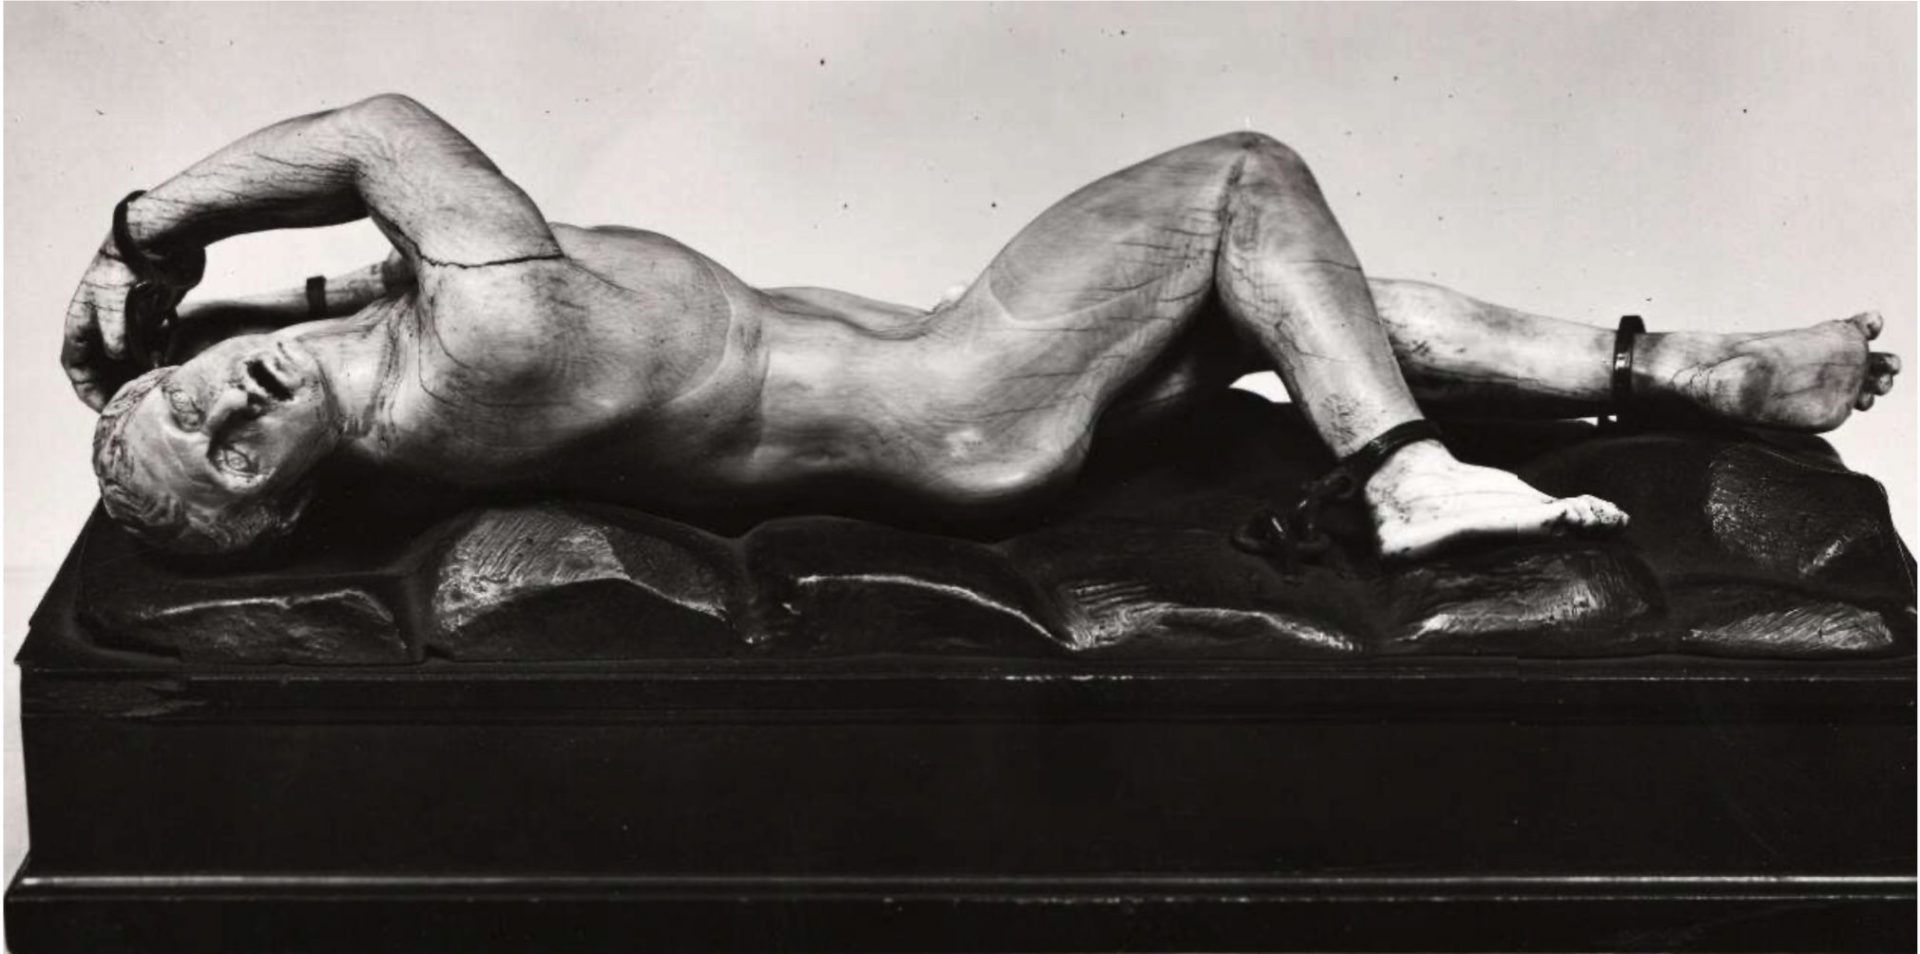 A black and white photo of a stone sculpture of a nude man lying on a black rock base.